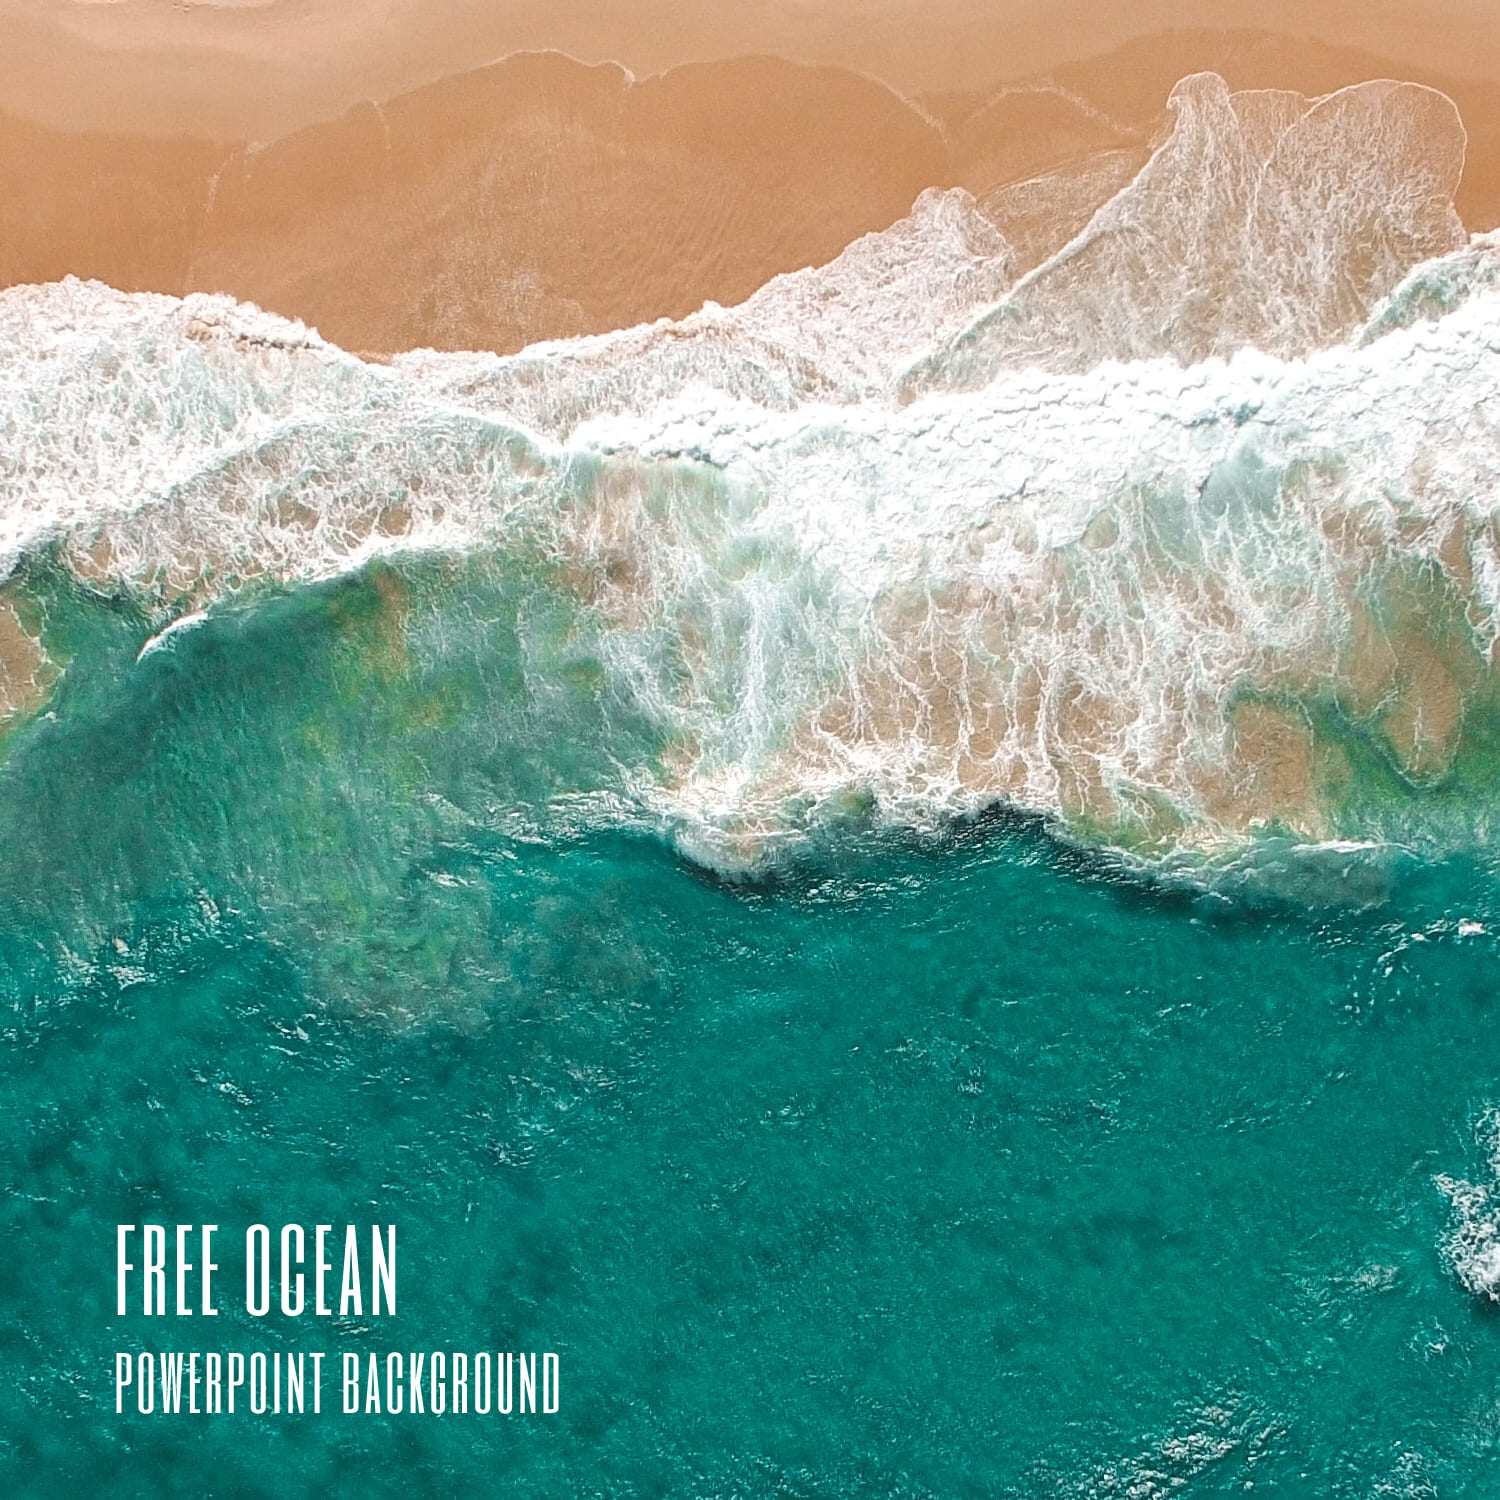 Free powerpoint background ocean - main image preview.